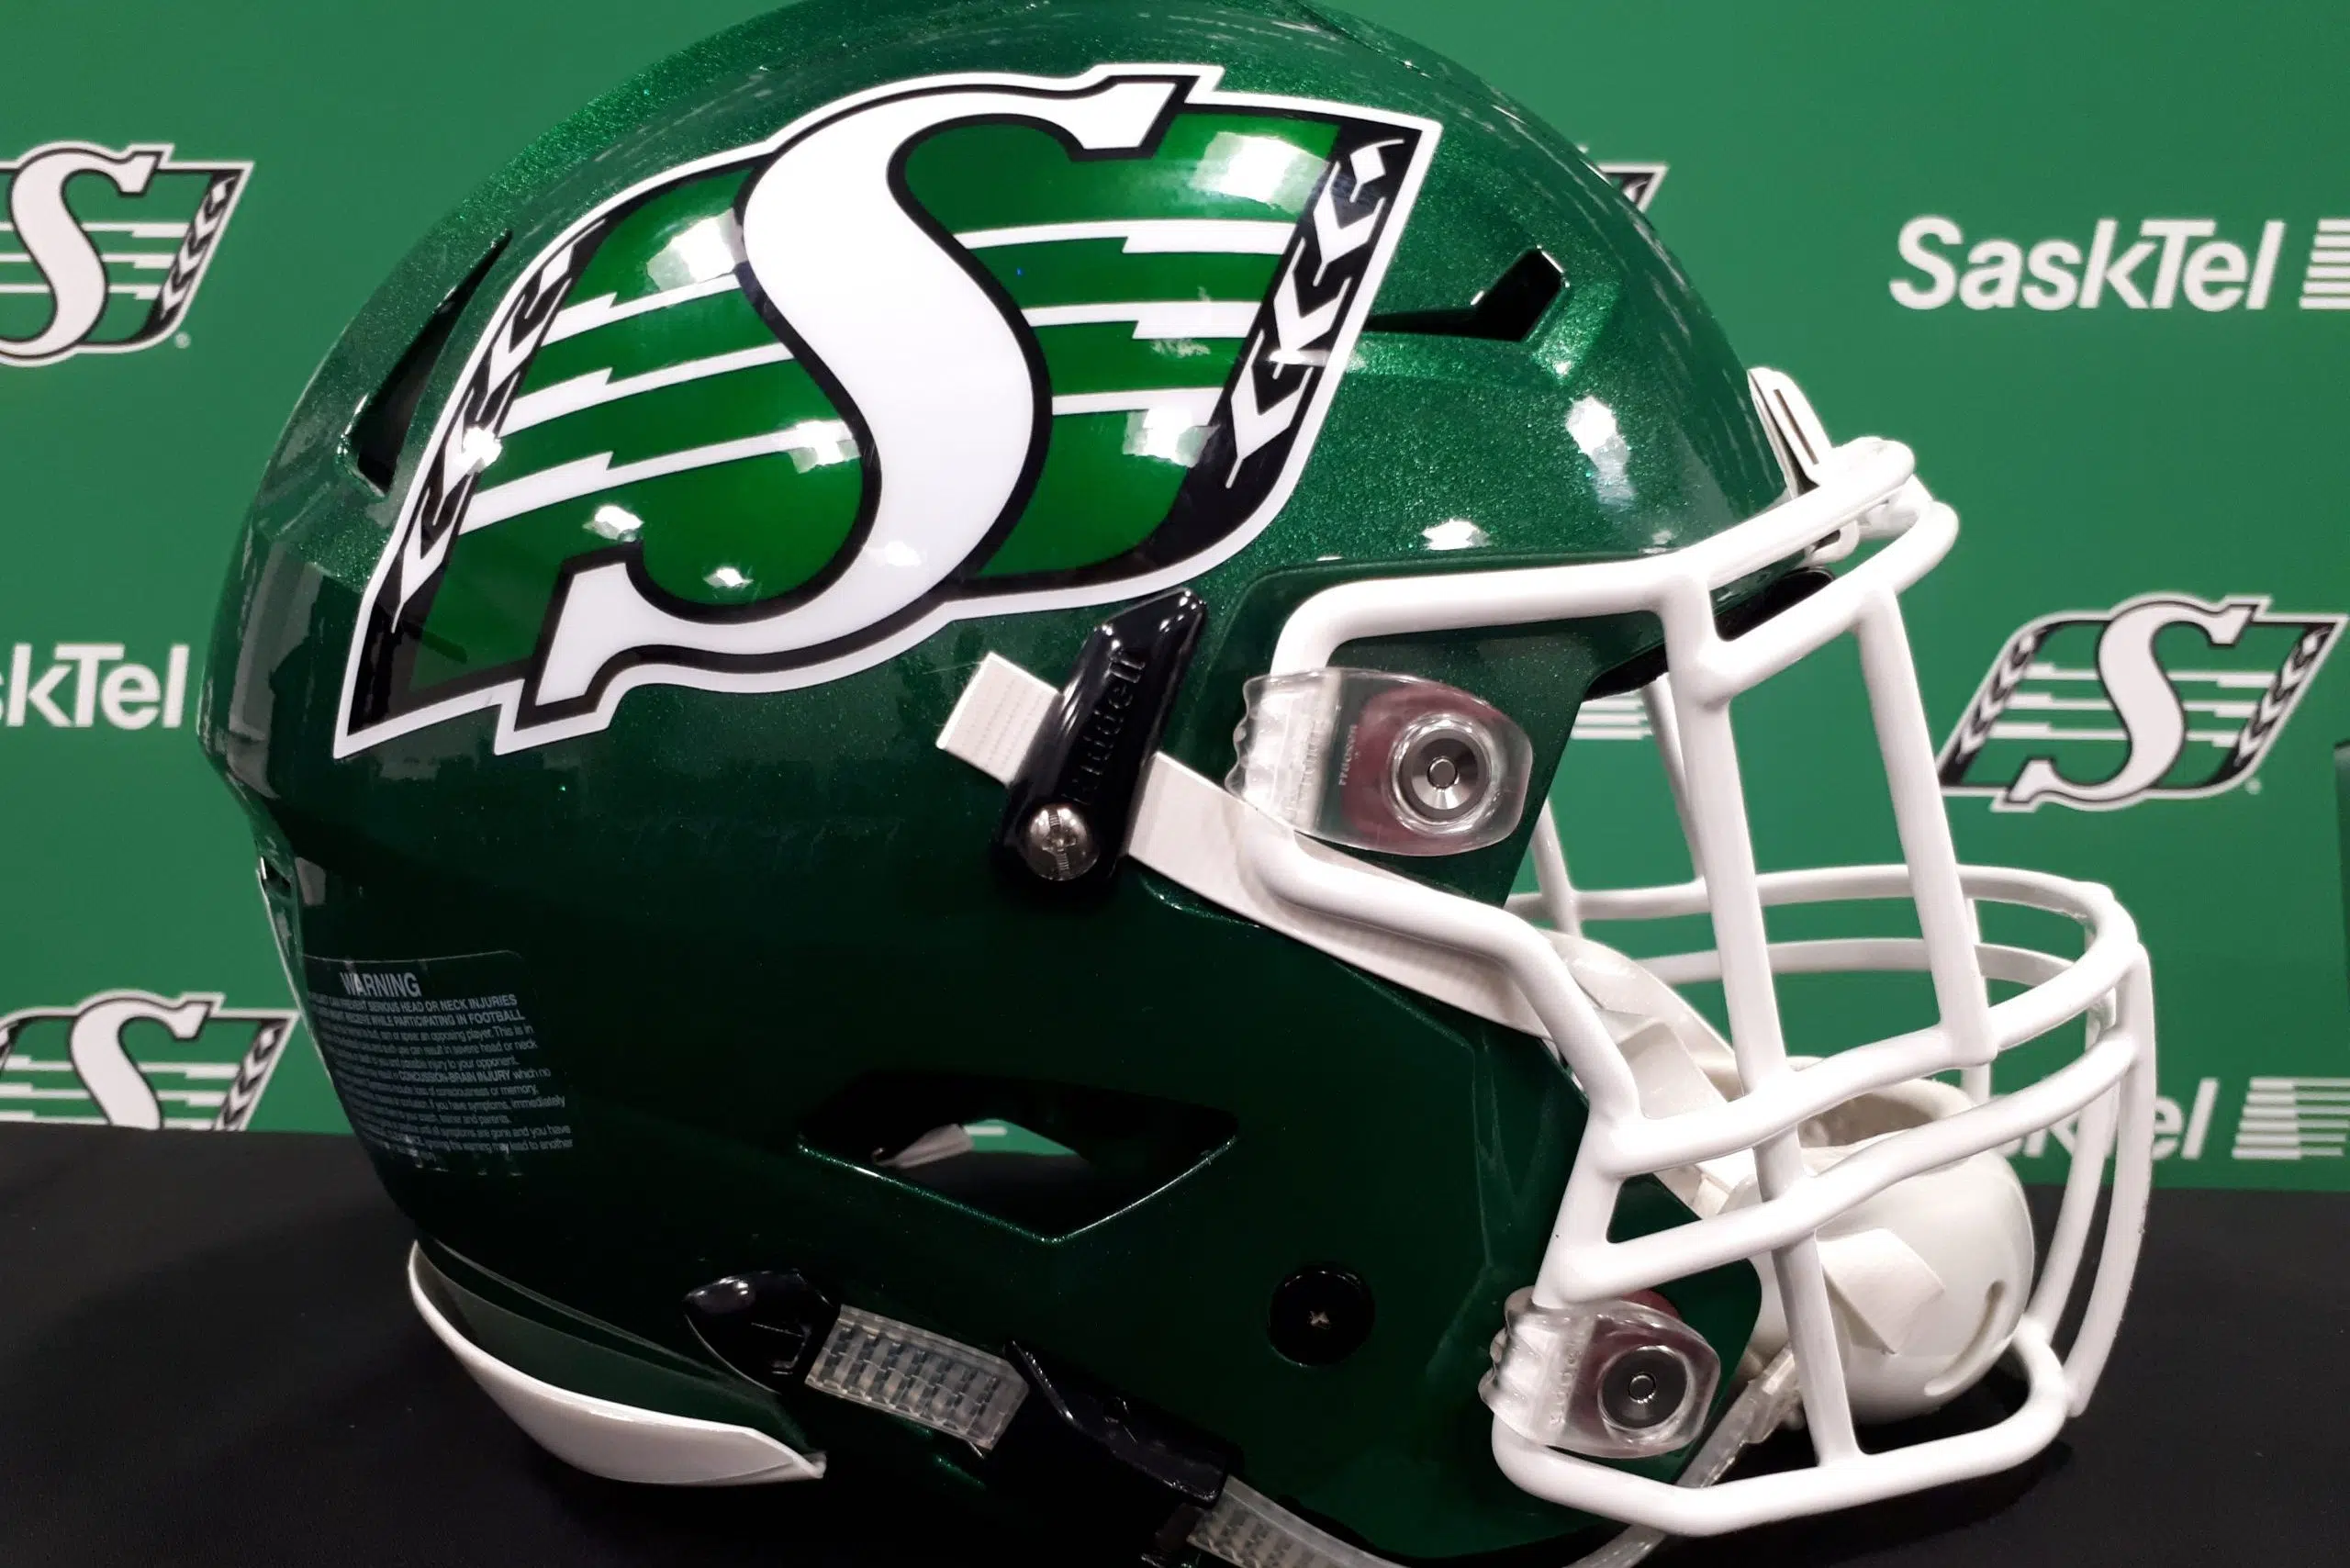 'Biggest financial crisis' in team history: Roughriders brace for economic impact of COVID-19